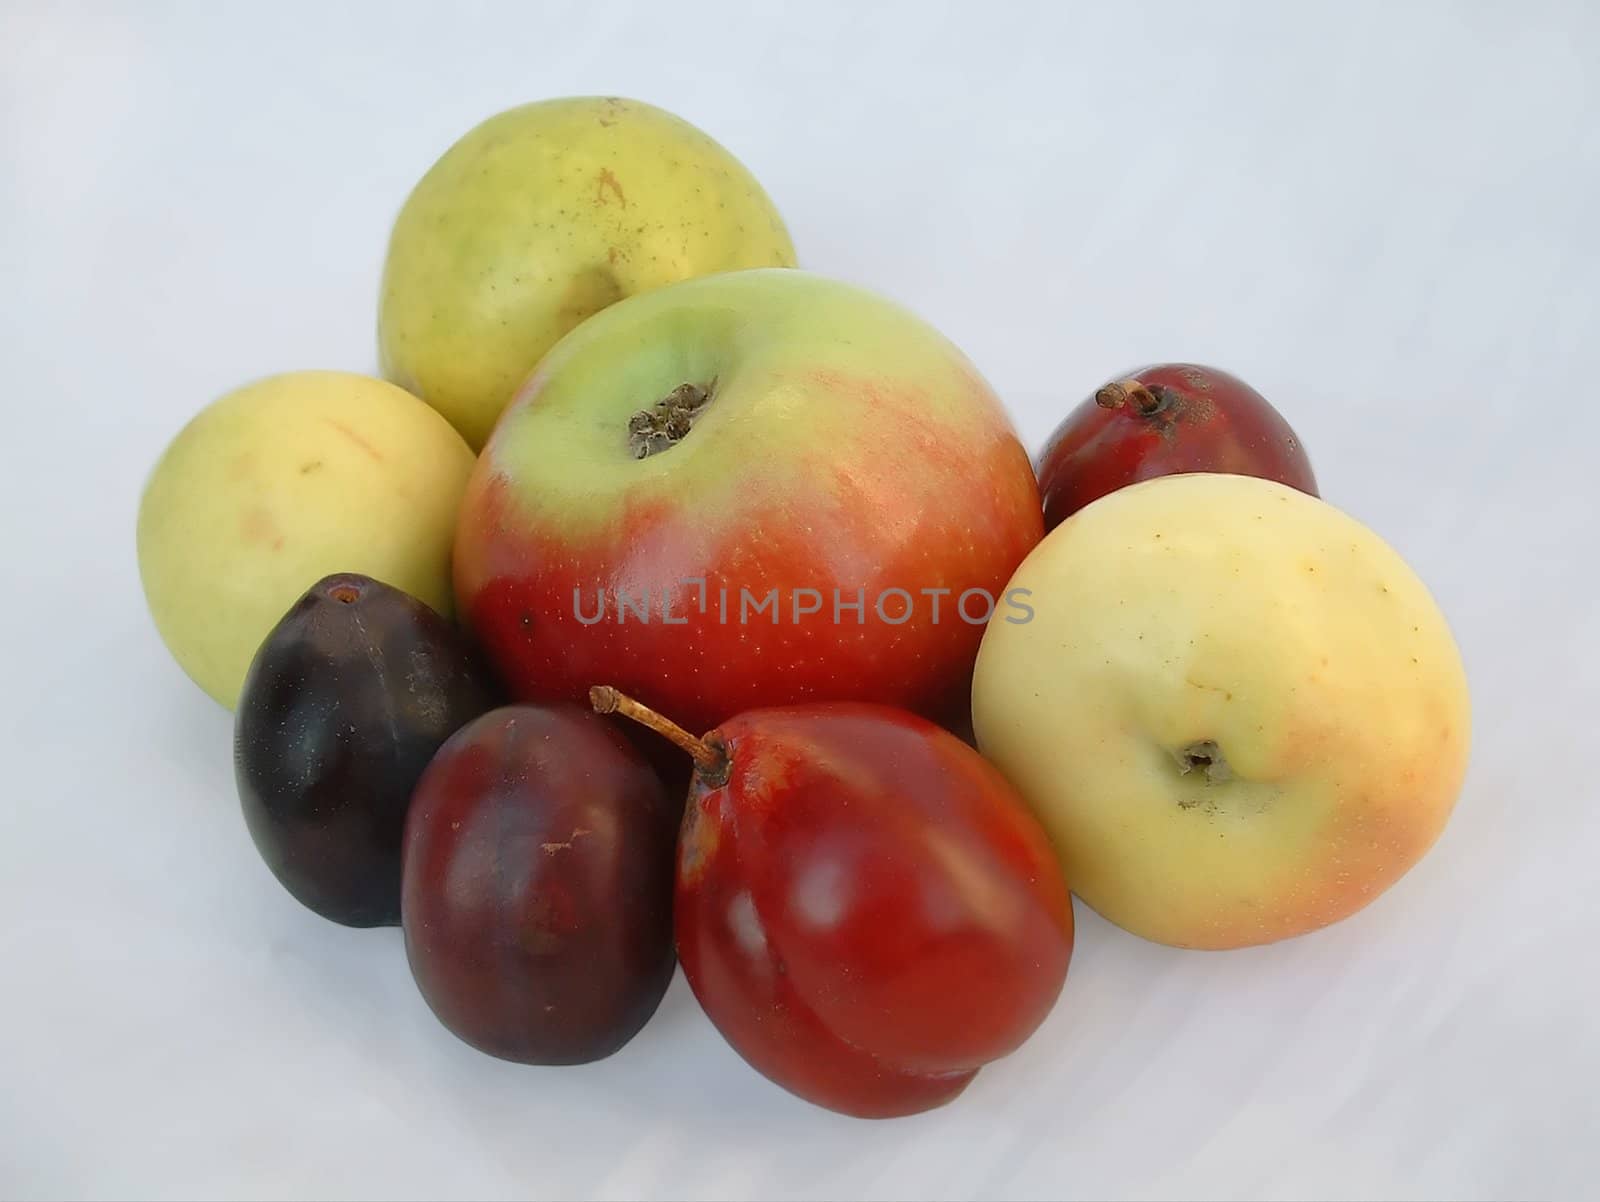 The natural ripe tasty not modified fruit apples and plums on a white background